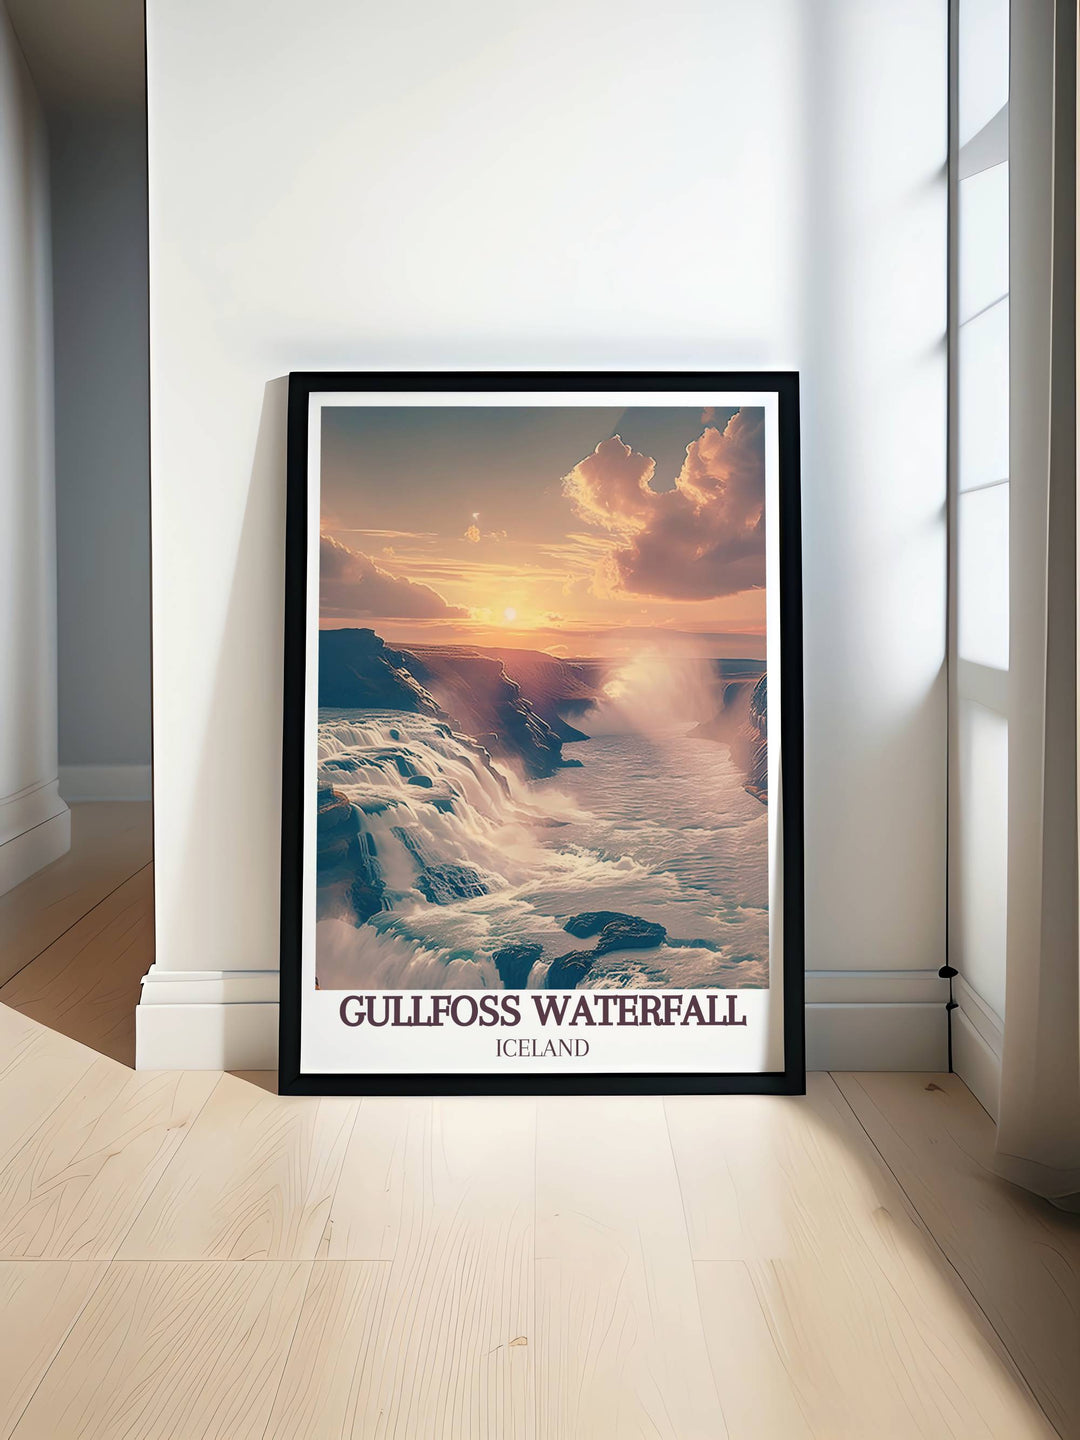 Gullfoss Waterfall with vibrant greenery in summer showcased in an Iceland travel print, perfect for nature enthusiasts and collectors